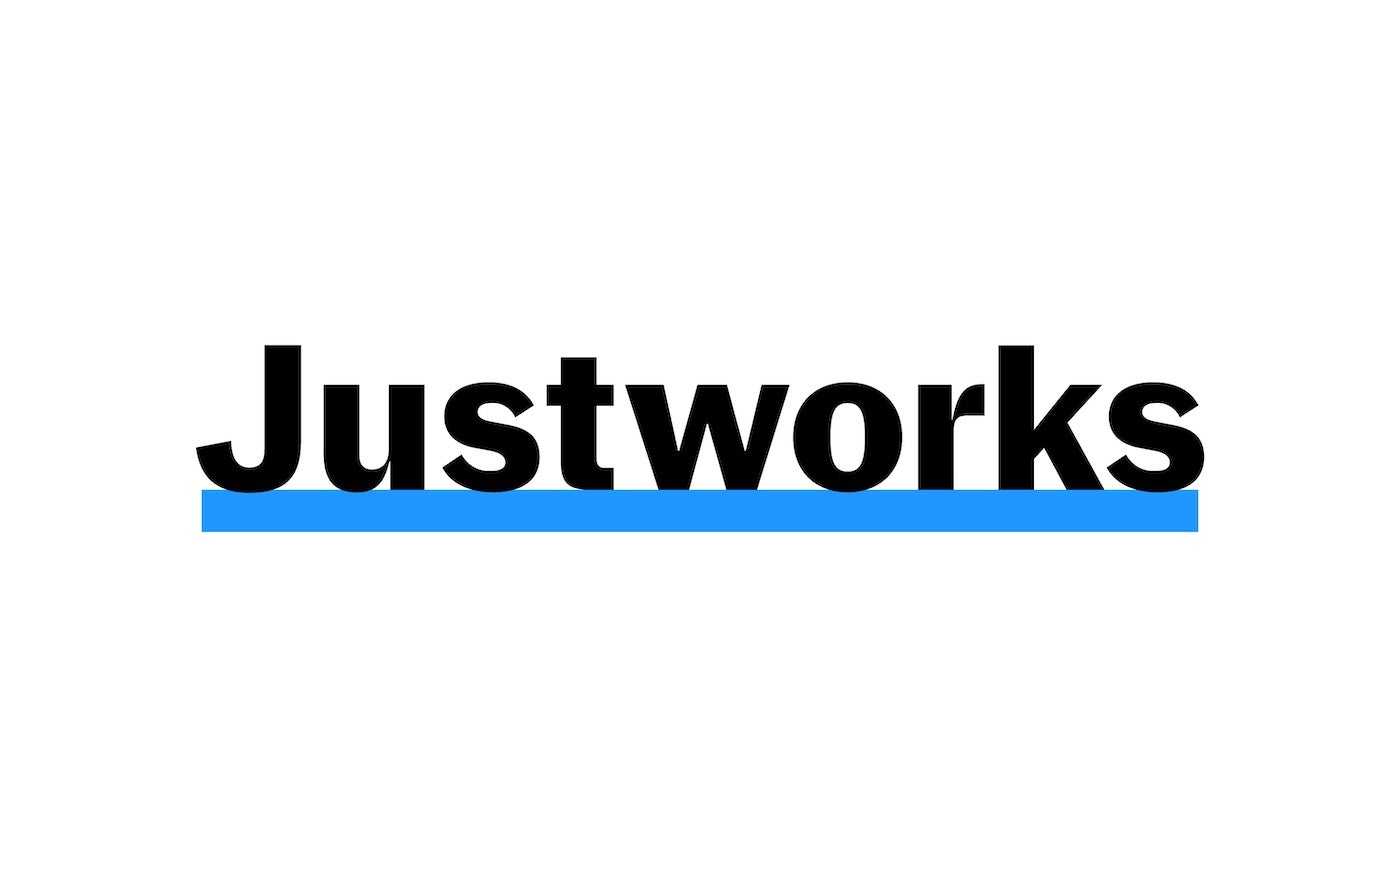 Justworks Review: Pricing, Features, Pros and Cons